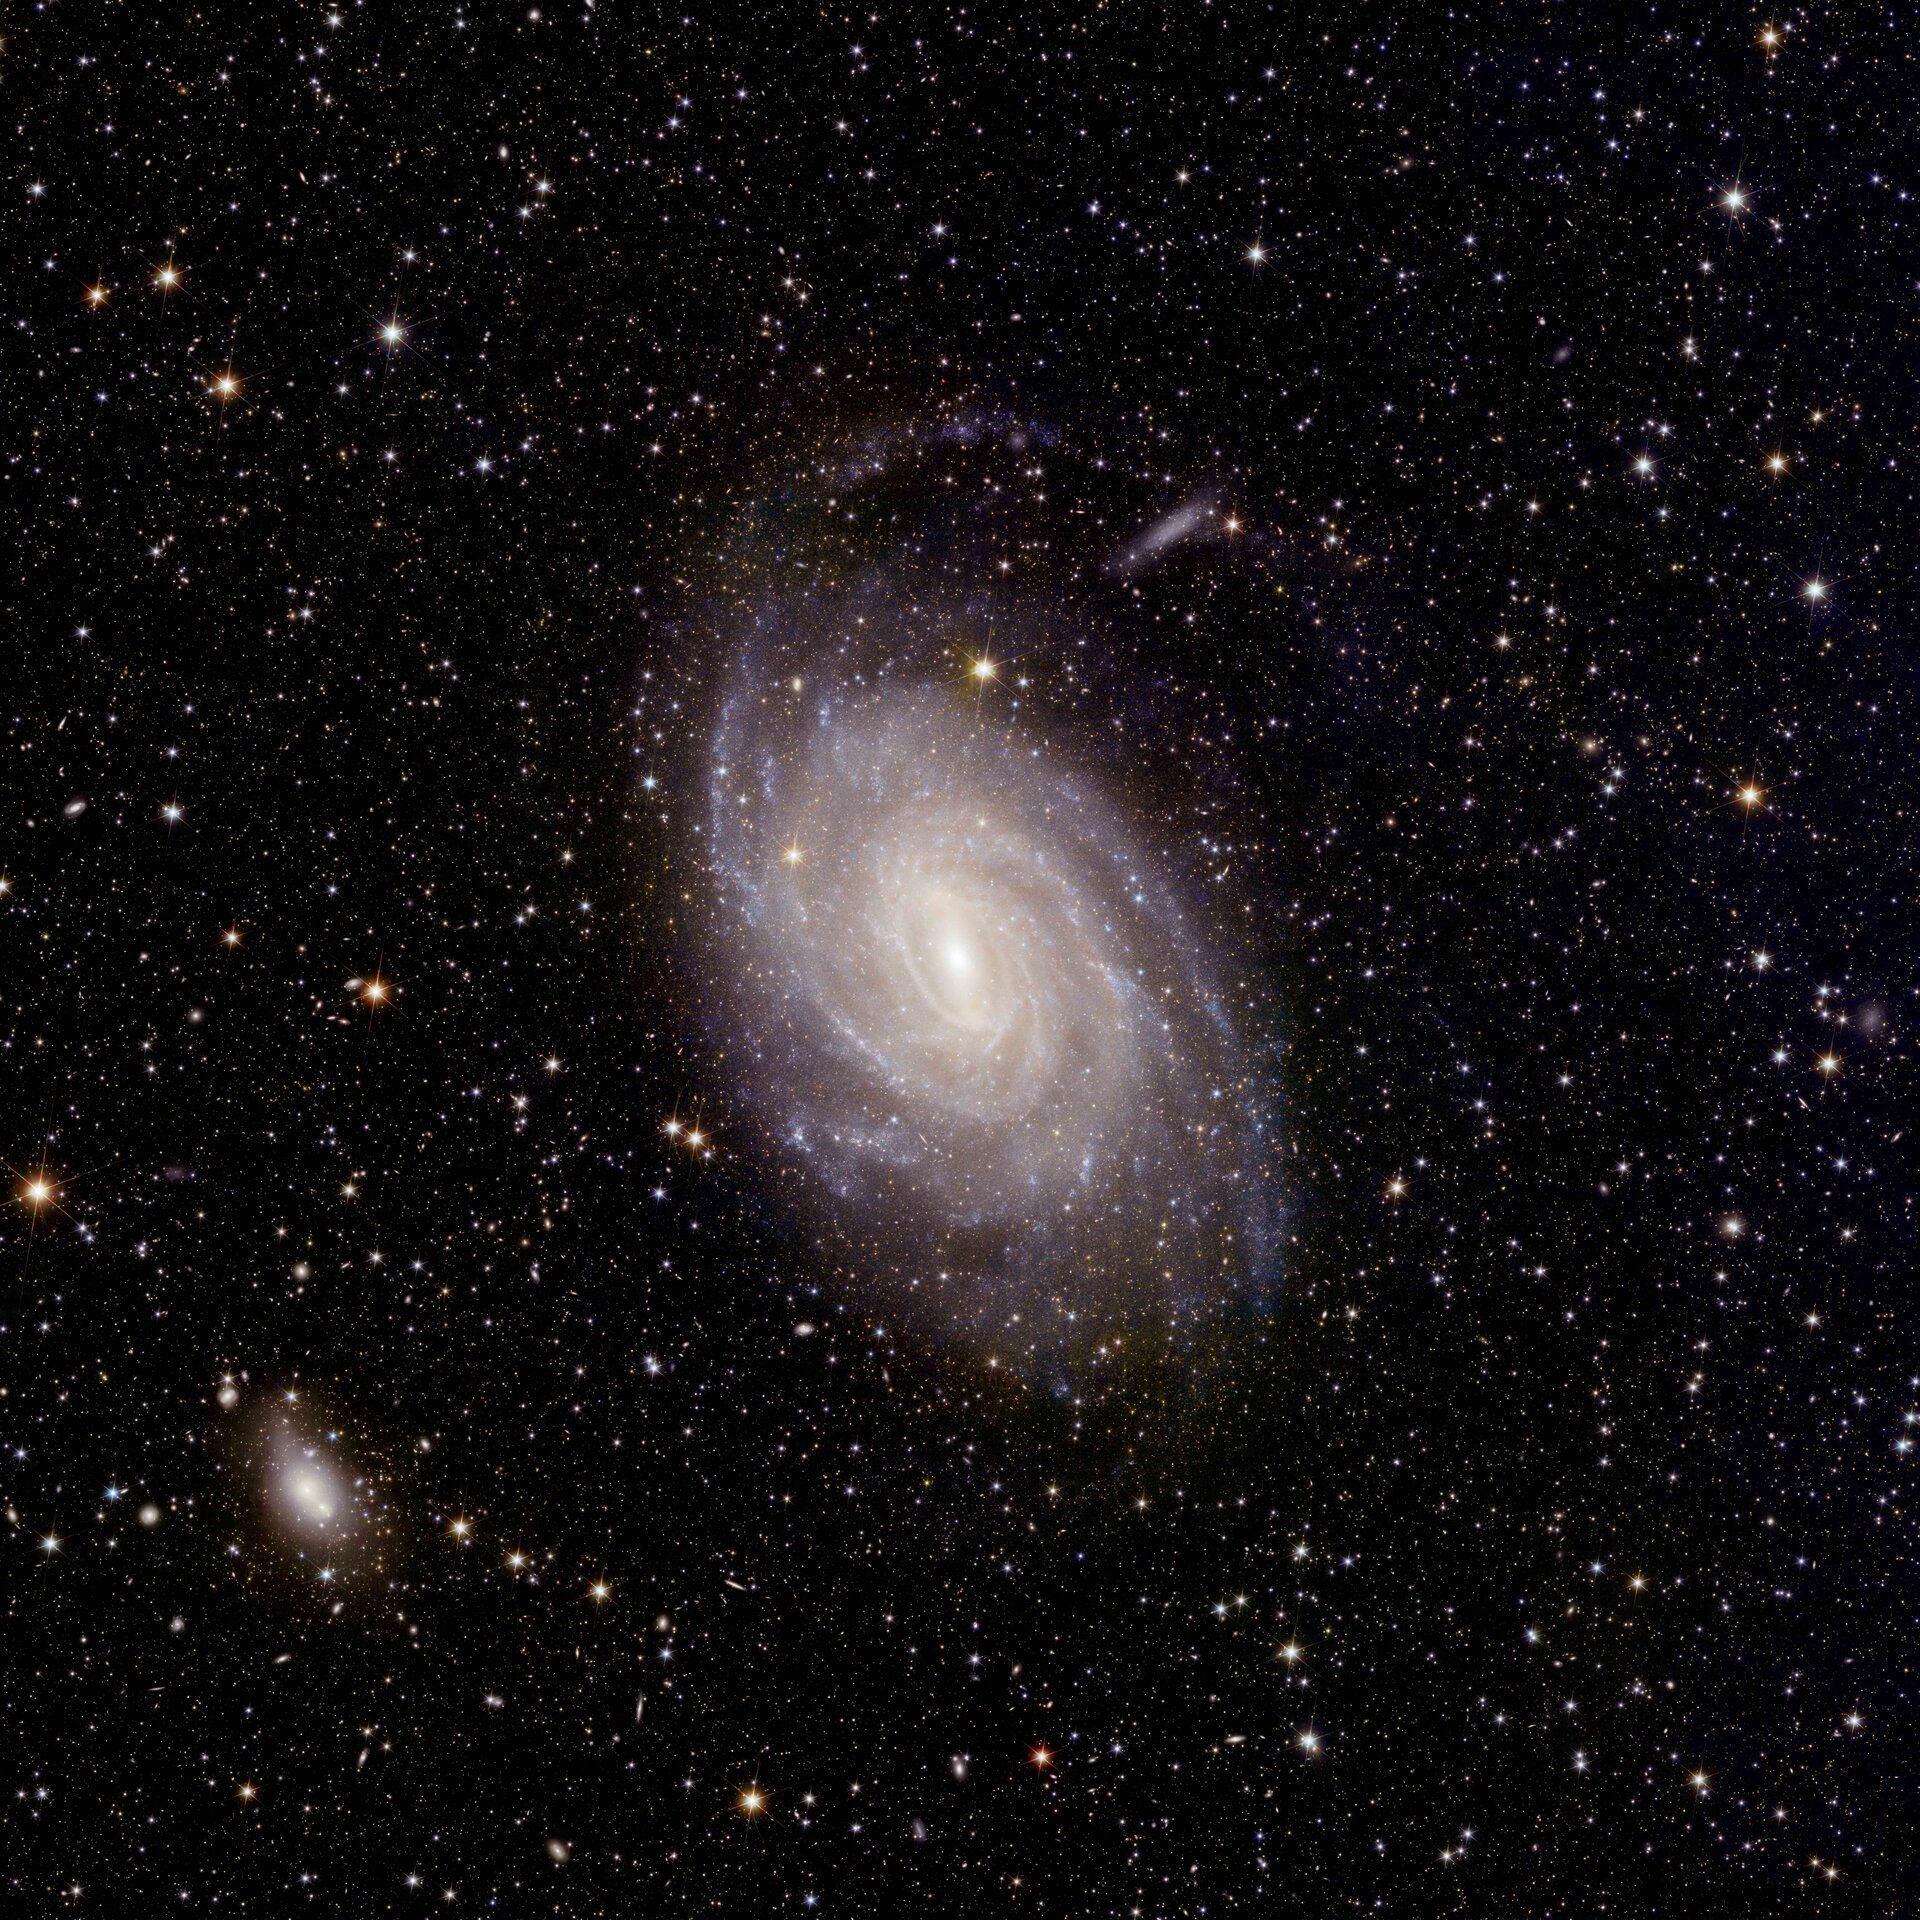 A perfect spiral galaxy in a field of stars